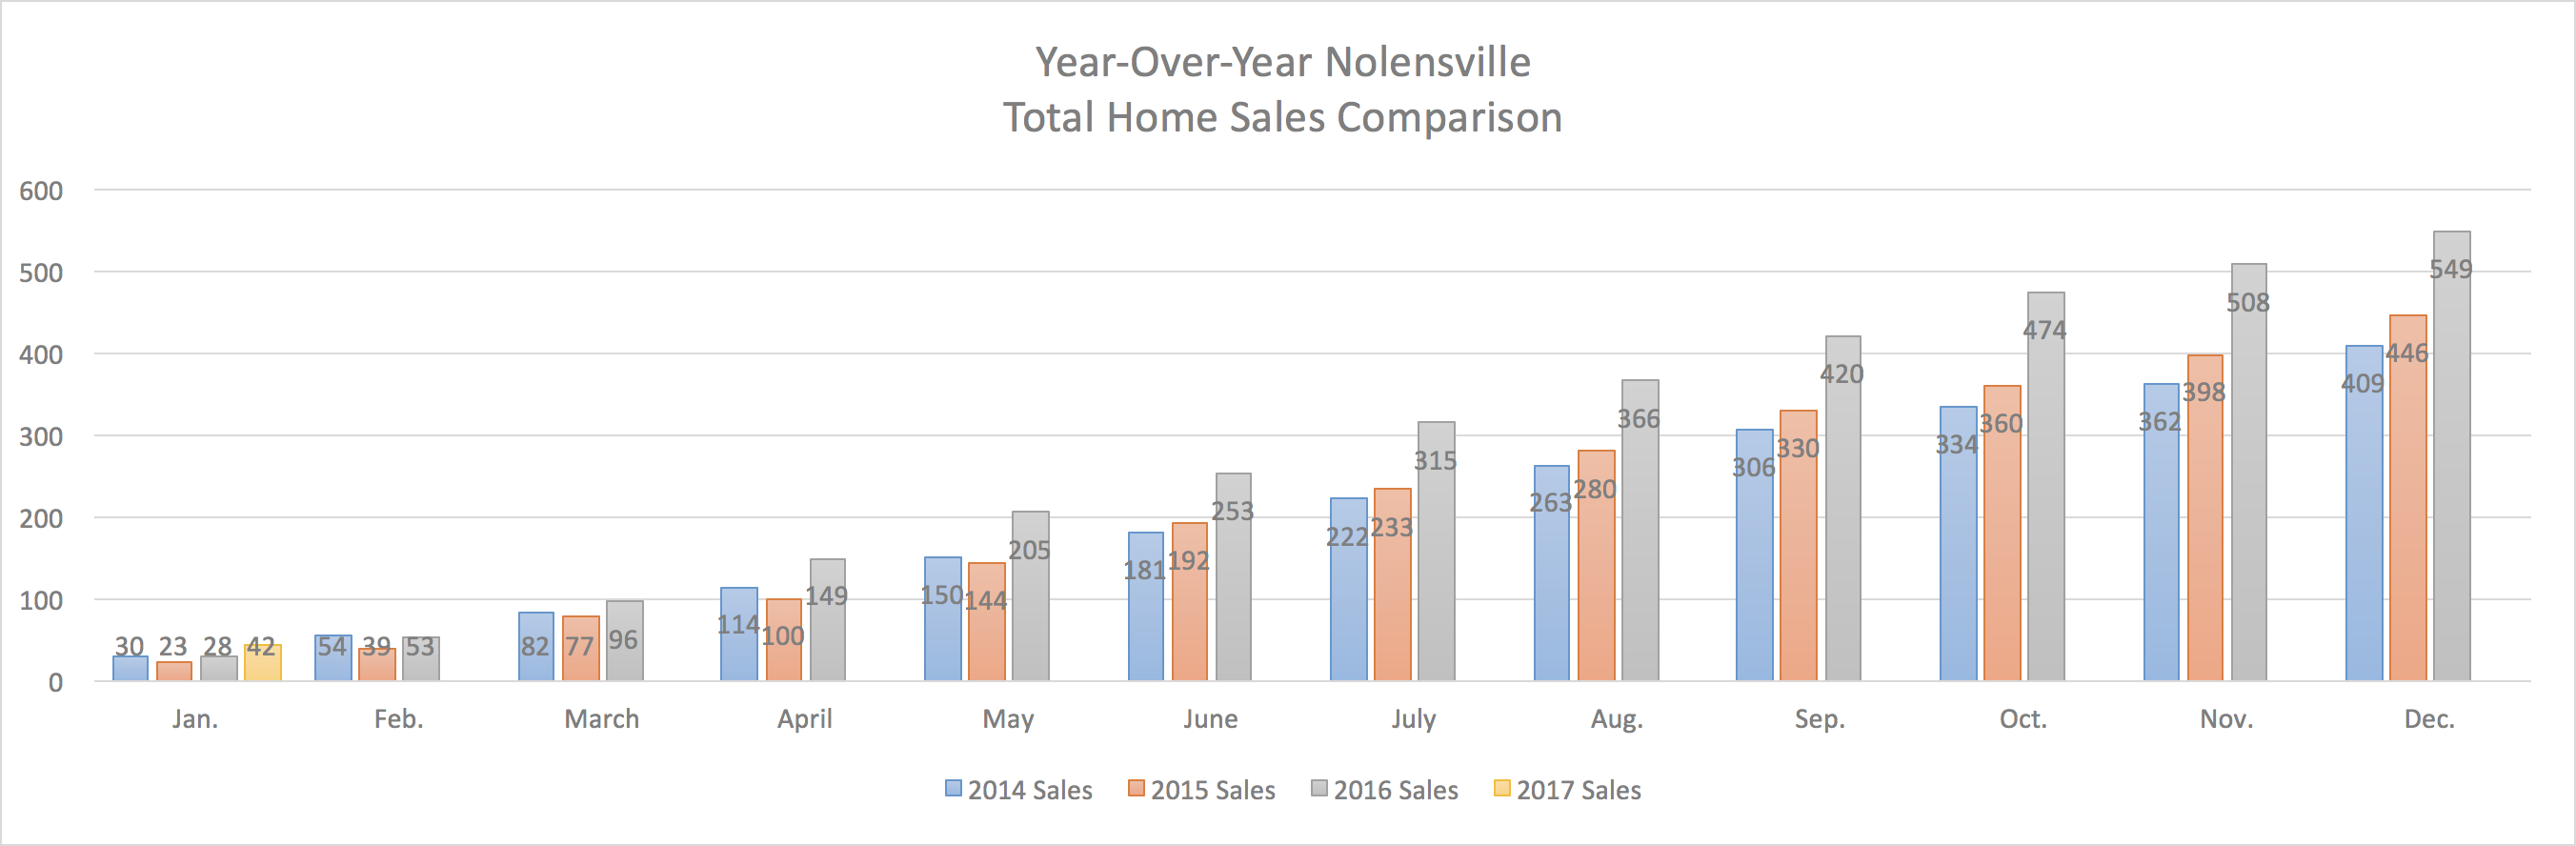 Nolensville Year-Over-Year Home Sales Through January 2017